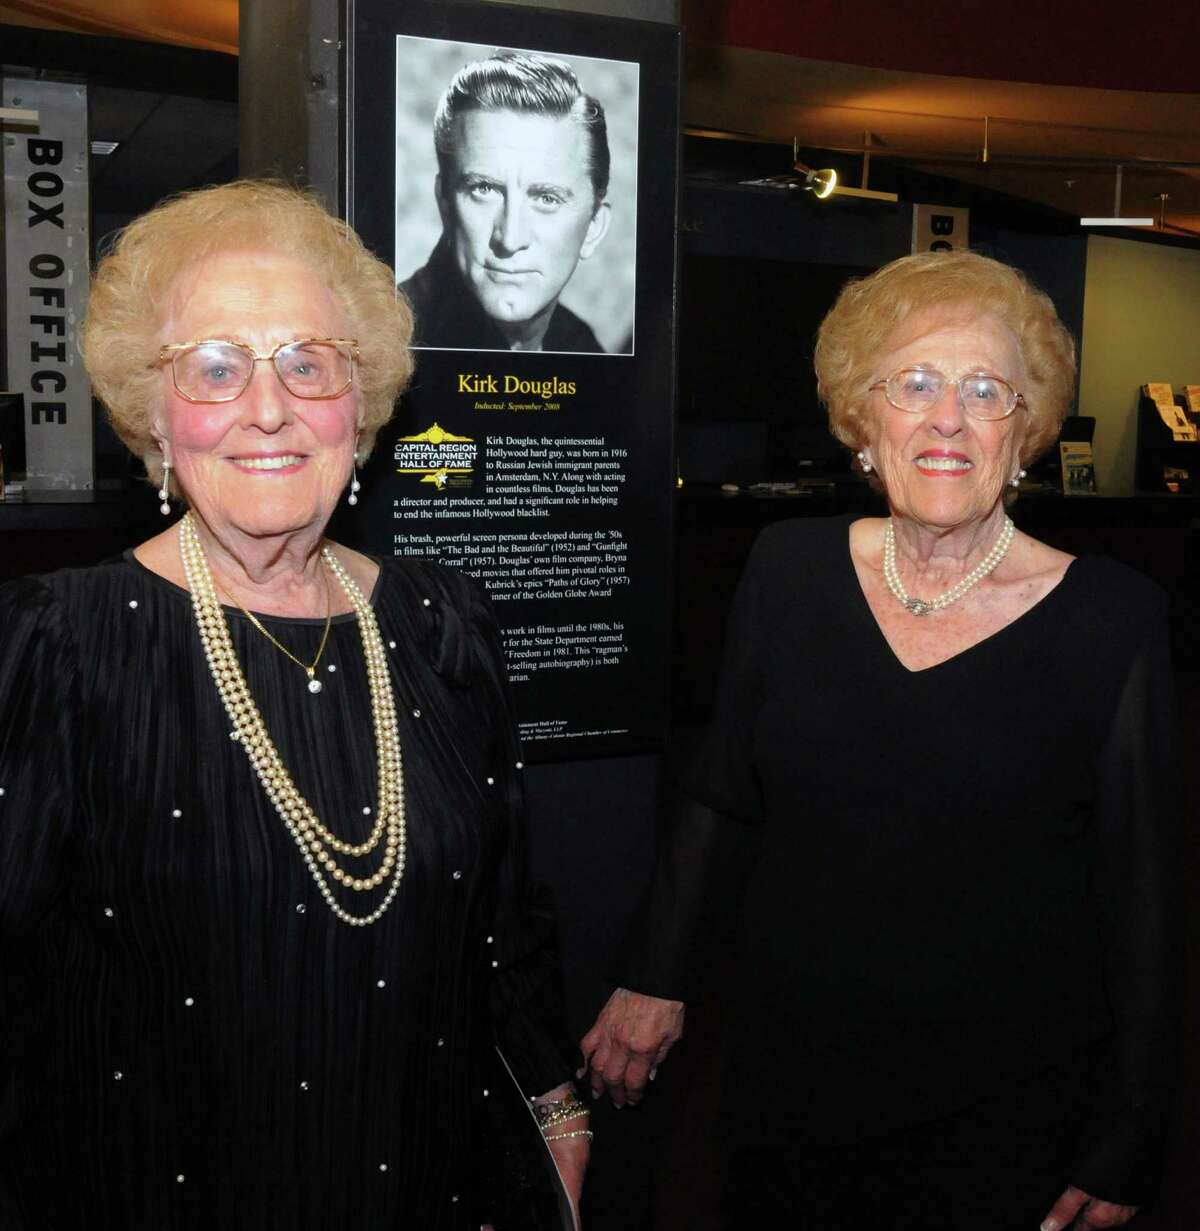 Twins, Fritzi Becker, of Albany N.Y. and Ida Sahr, of Schenectady, sisters of Kirk Douglas, attend the Proctors Capital Region Hall of Fame induction Sept. 20, 2008. (James Goolsby/Times Union archive)